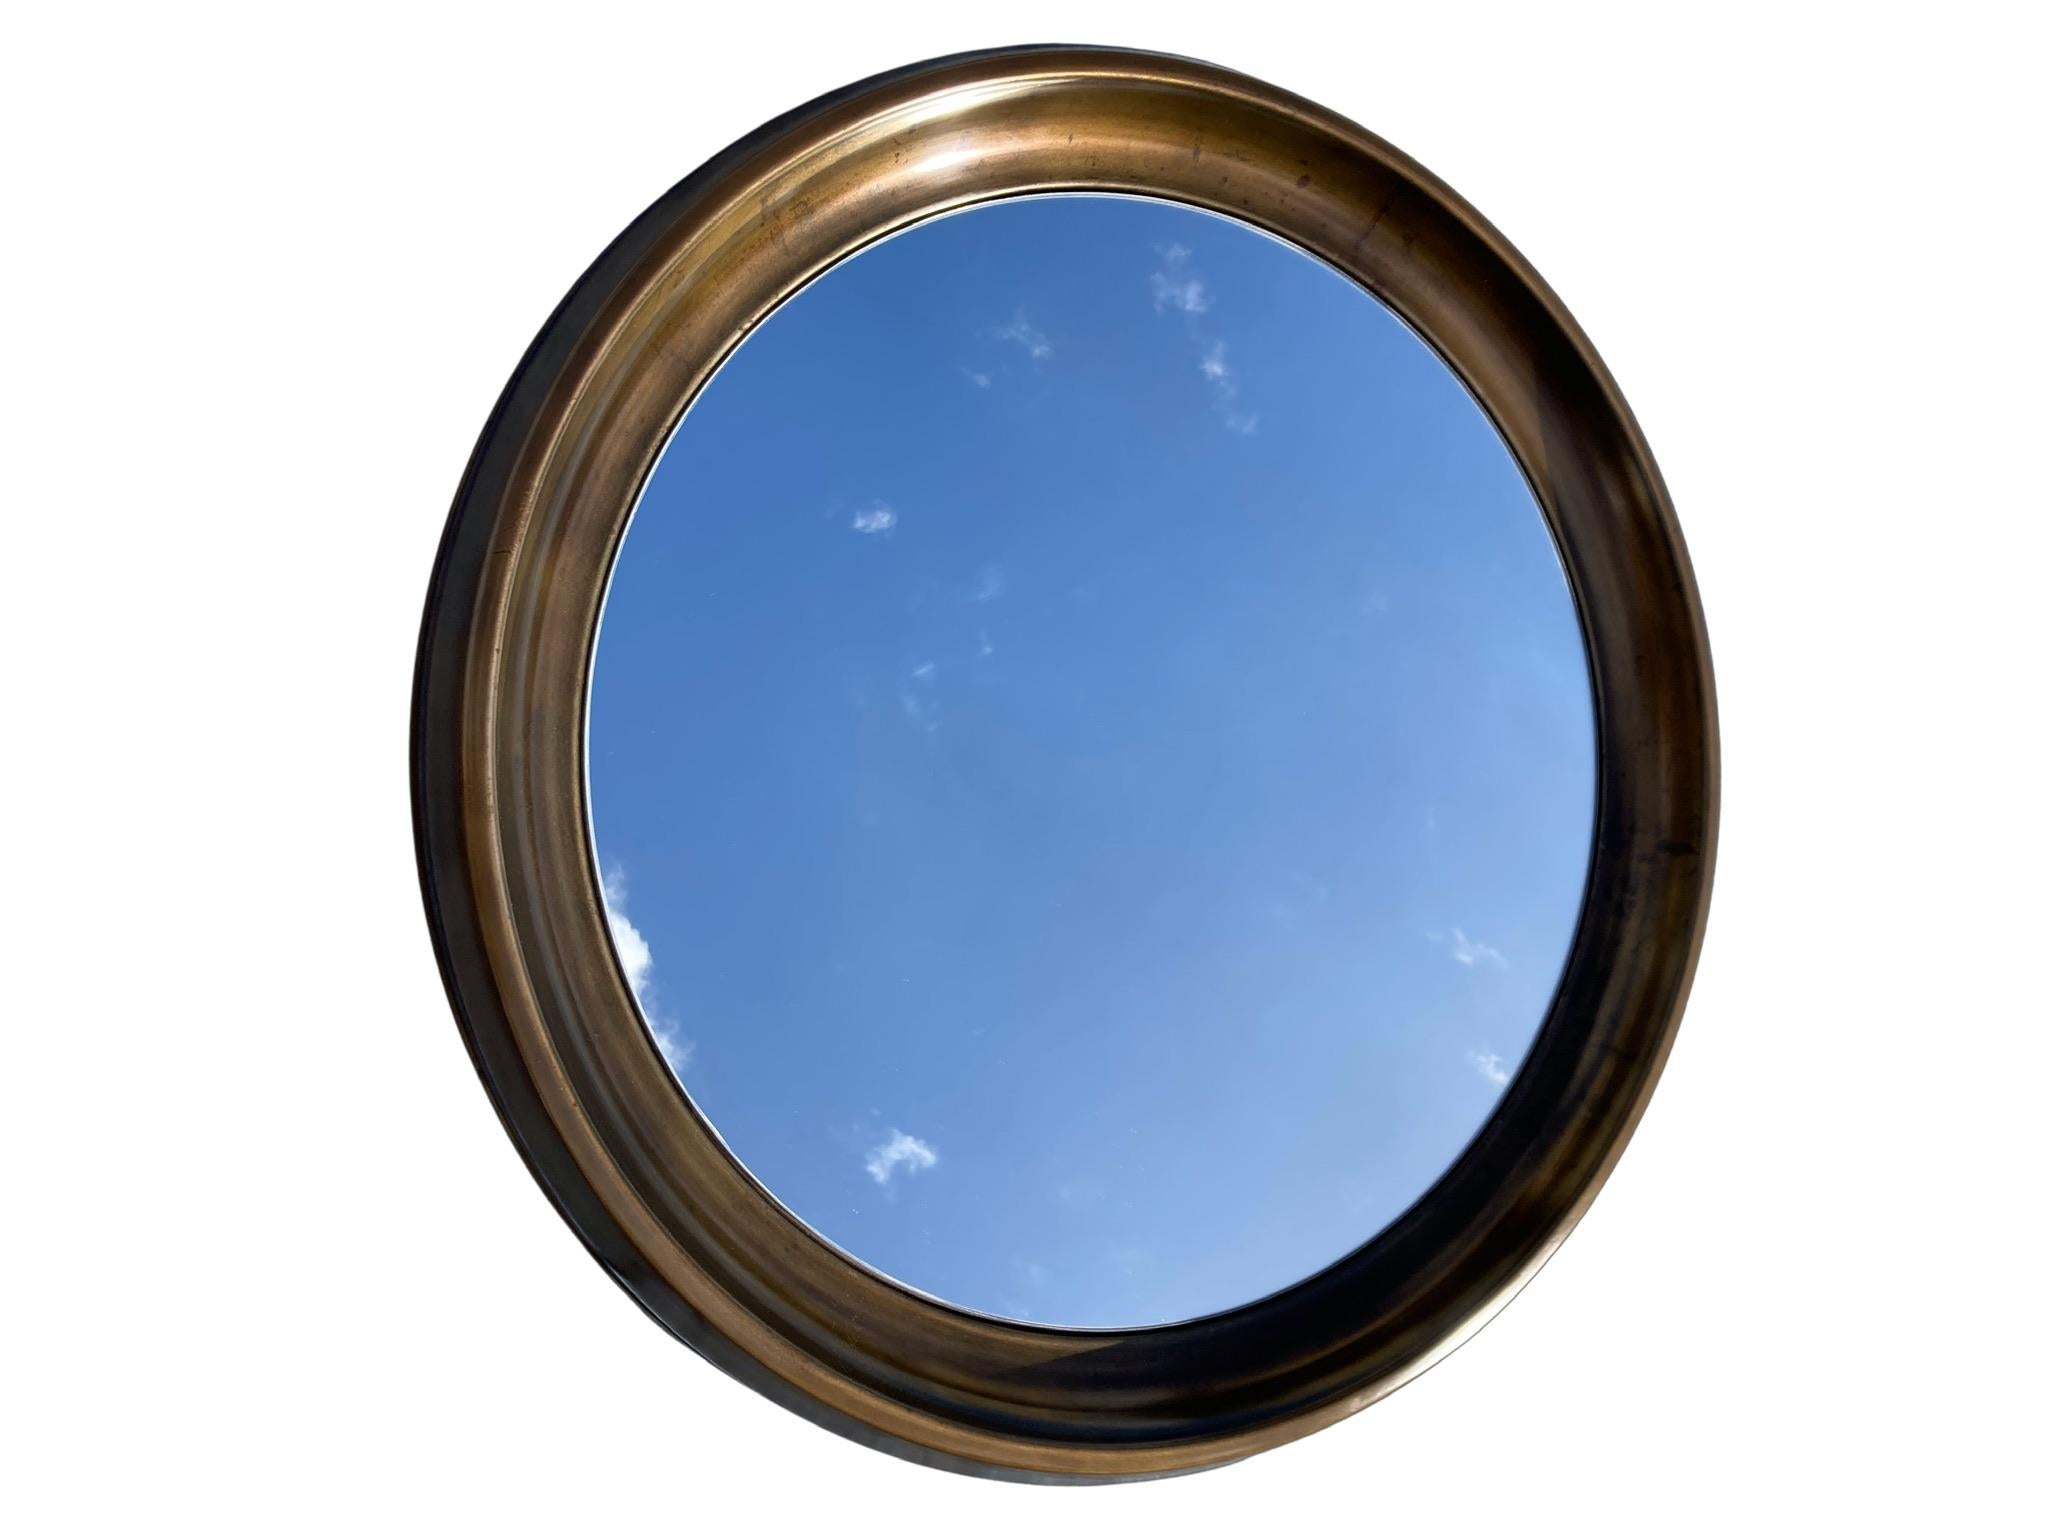 Large Mid-Century Modern mirror most likely made by Mastercraft.
Brass plated metal, the brass plating has a strong patina. Total weight is seventy pounds.